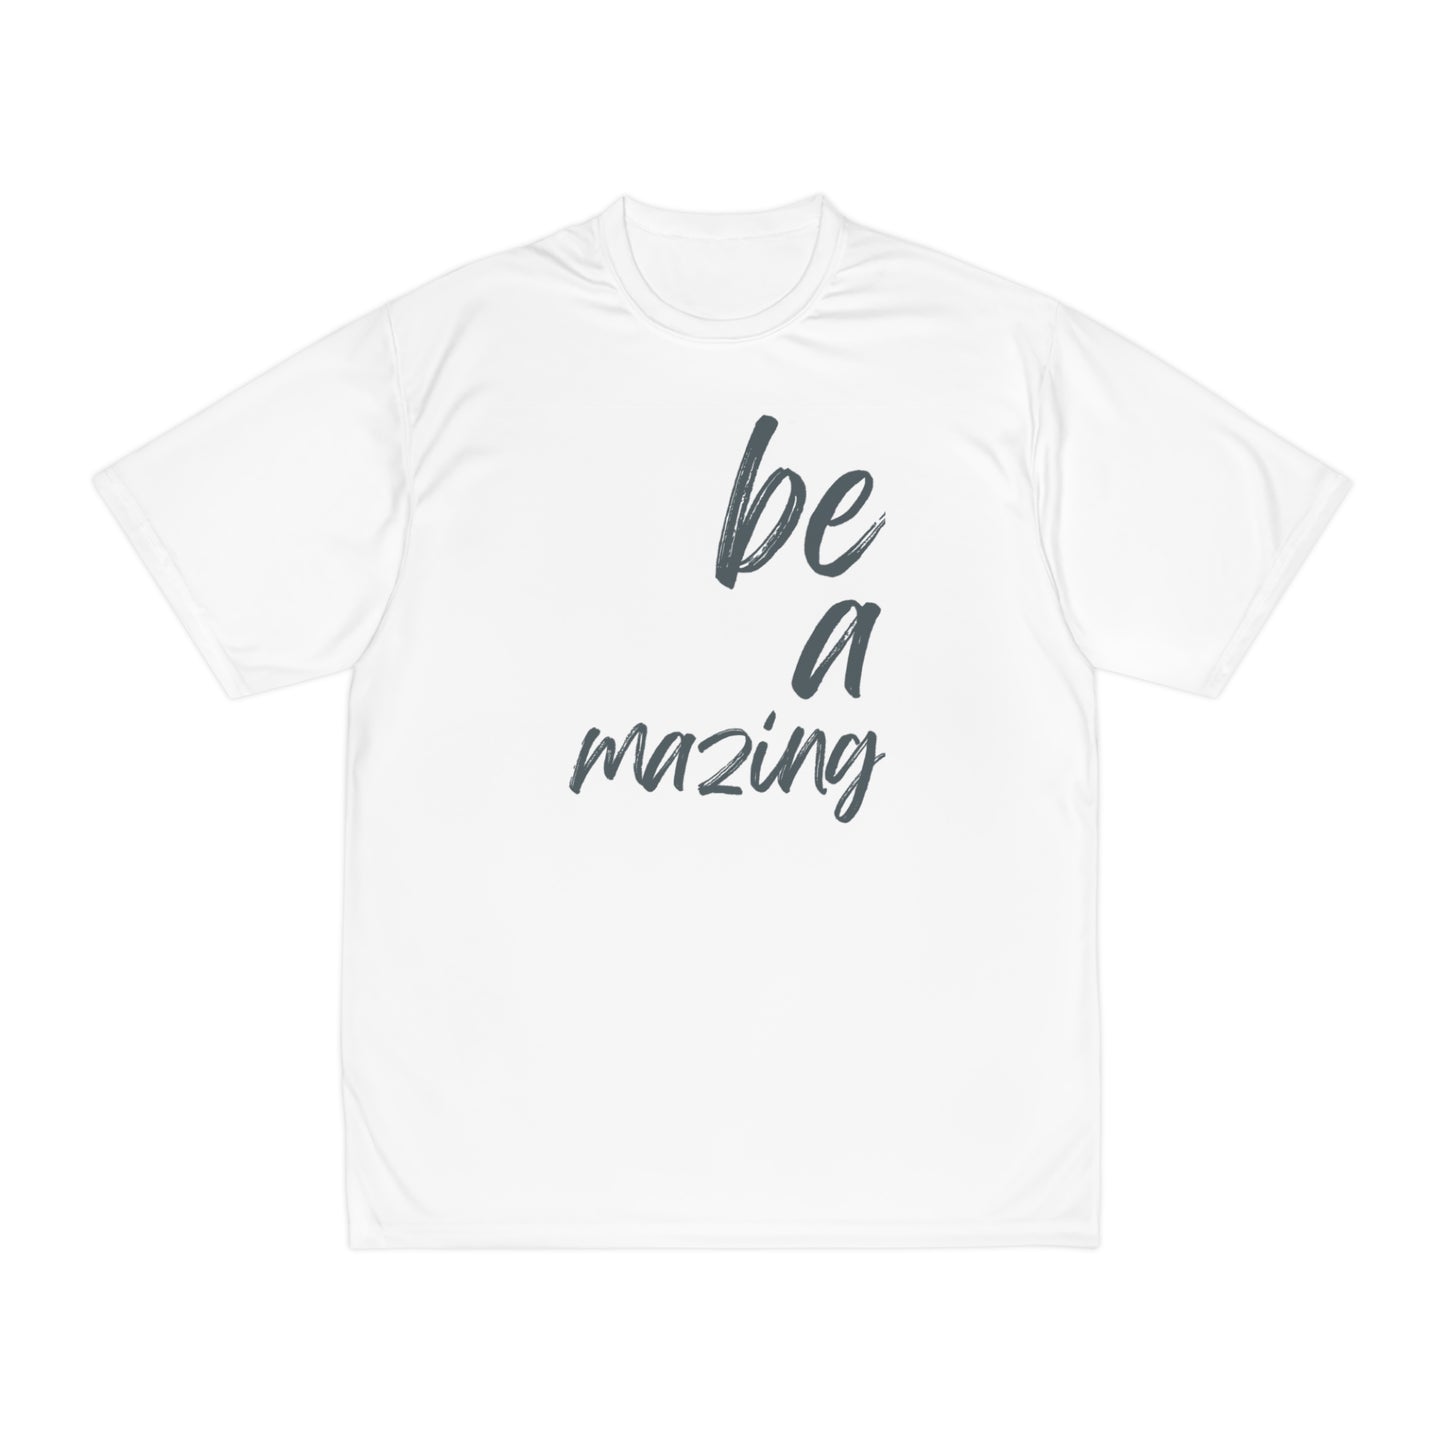 Be Amazing Men's T-Shirt, Mens shirt, gift for men, dads shirt, gift for dads